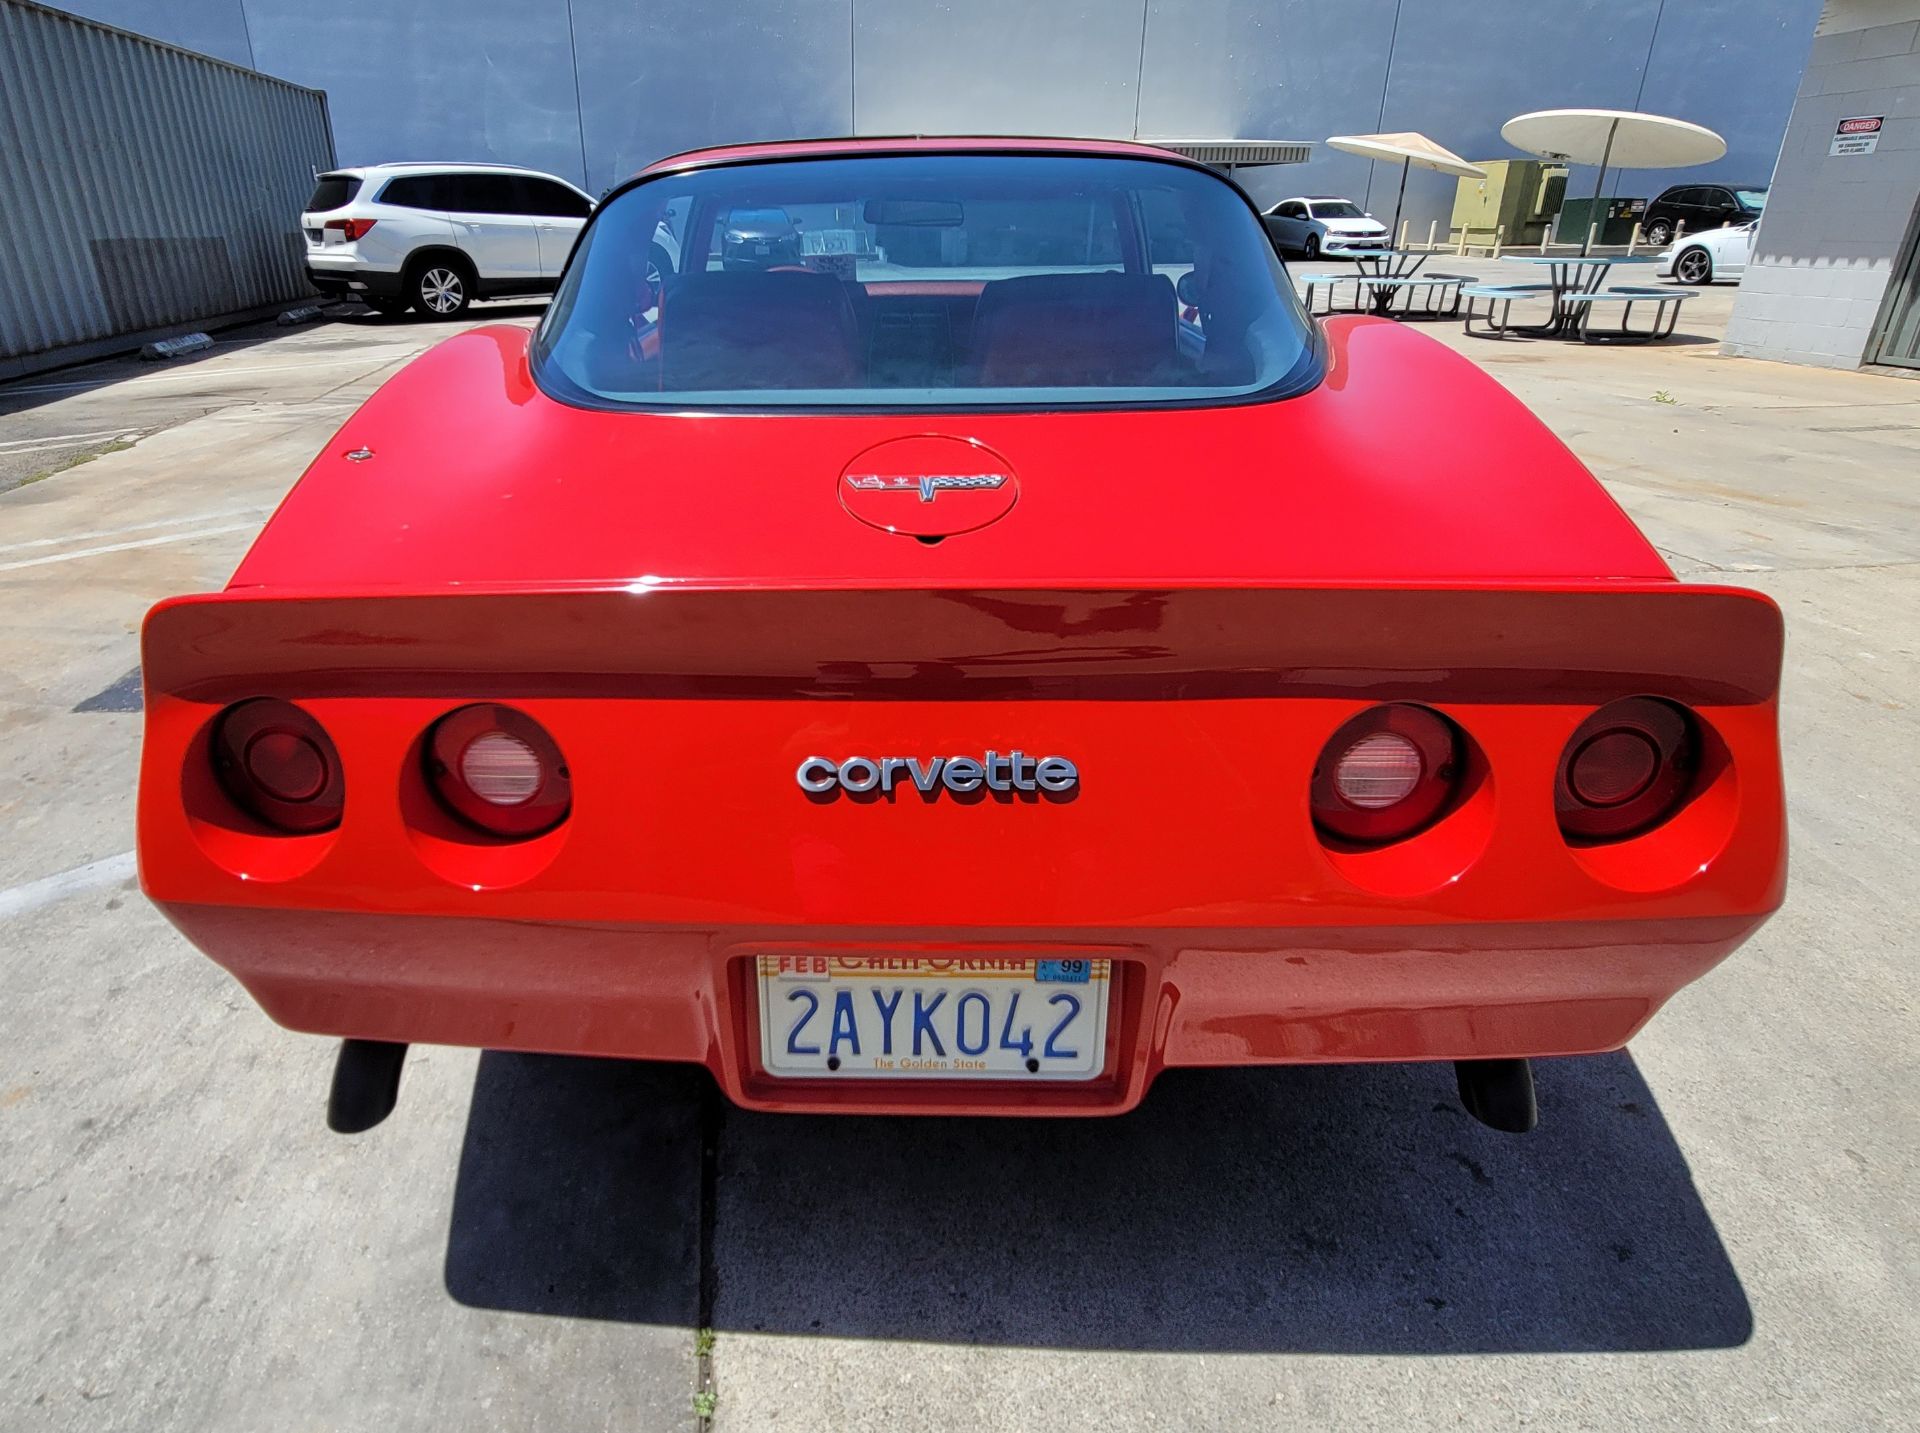 1980 CHEVROLET CORVETTE, WAS VIC EDELBROCK'S PERSONAL CAR BOUGHT FOR R&D, RED INTERIOR, TITLE ONLY. - Image 41 of 70